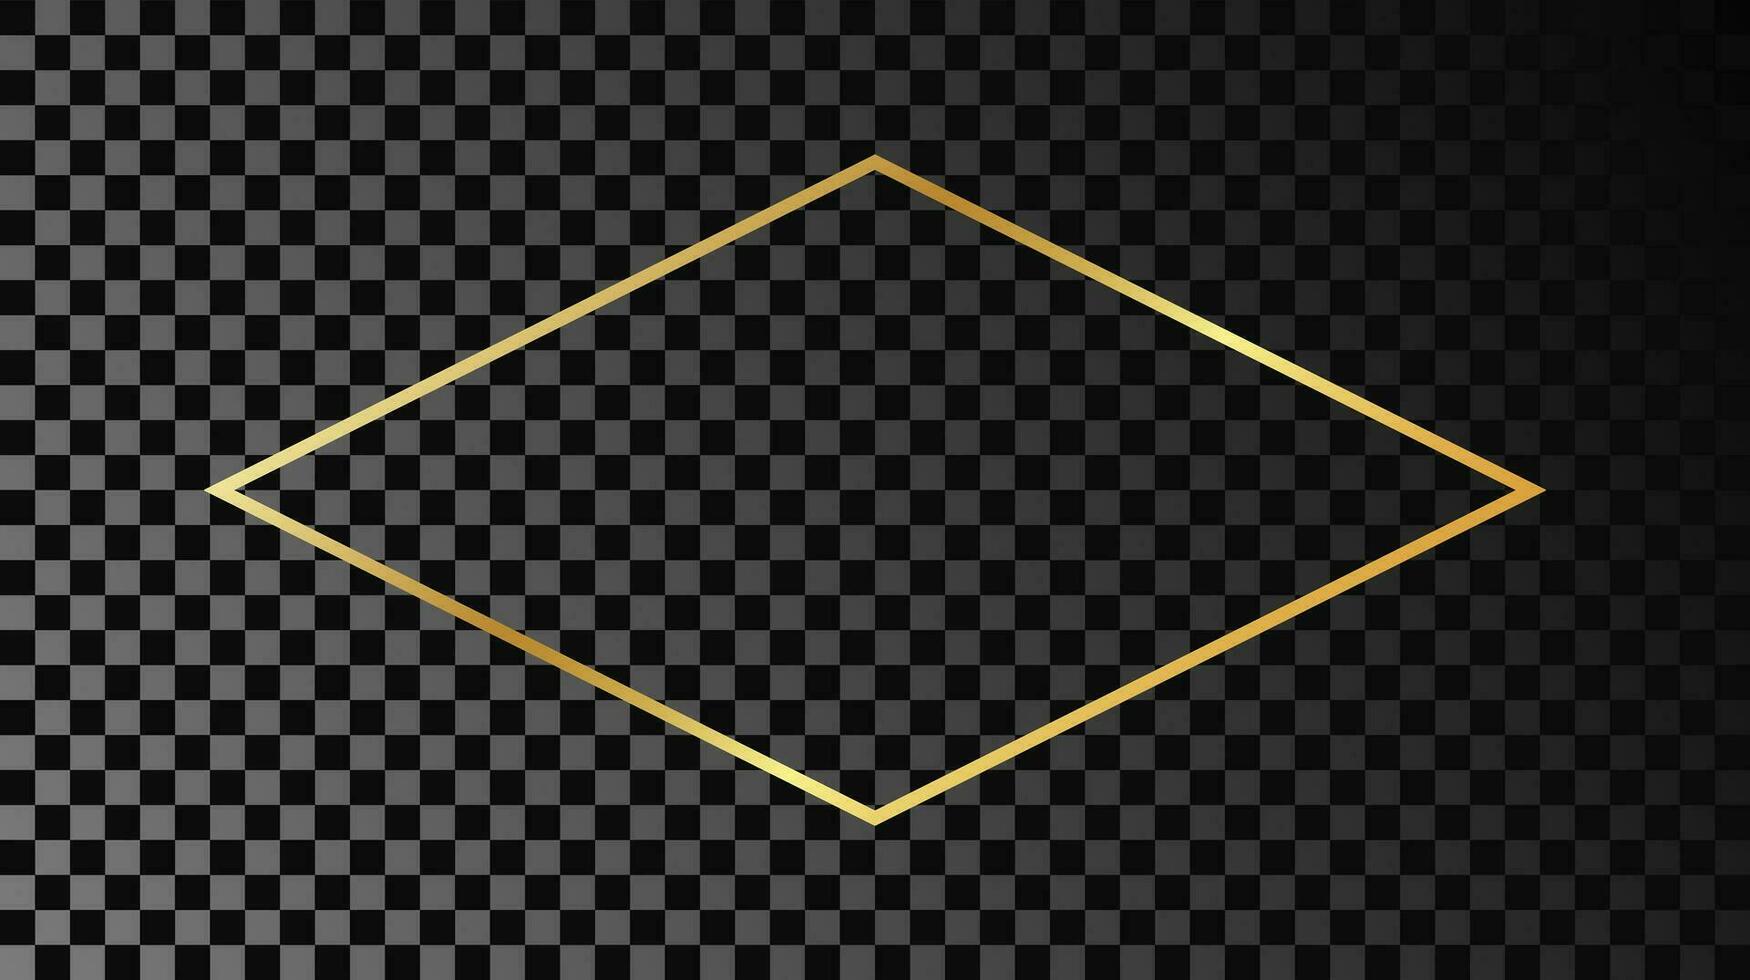 Gold glowing rhombus  shape frame isolated on dark background. Shiny frame with glowing effects. Vector illustration.